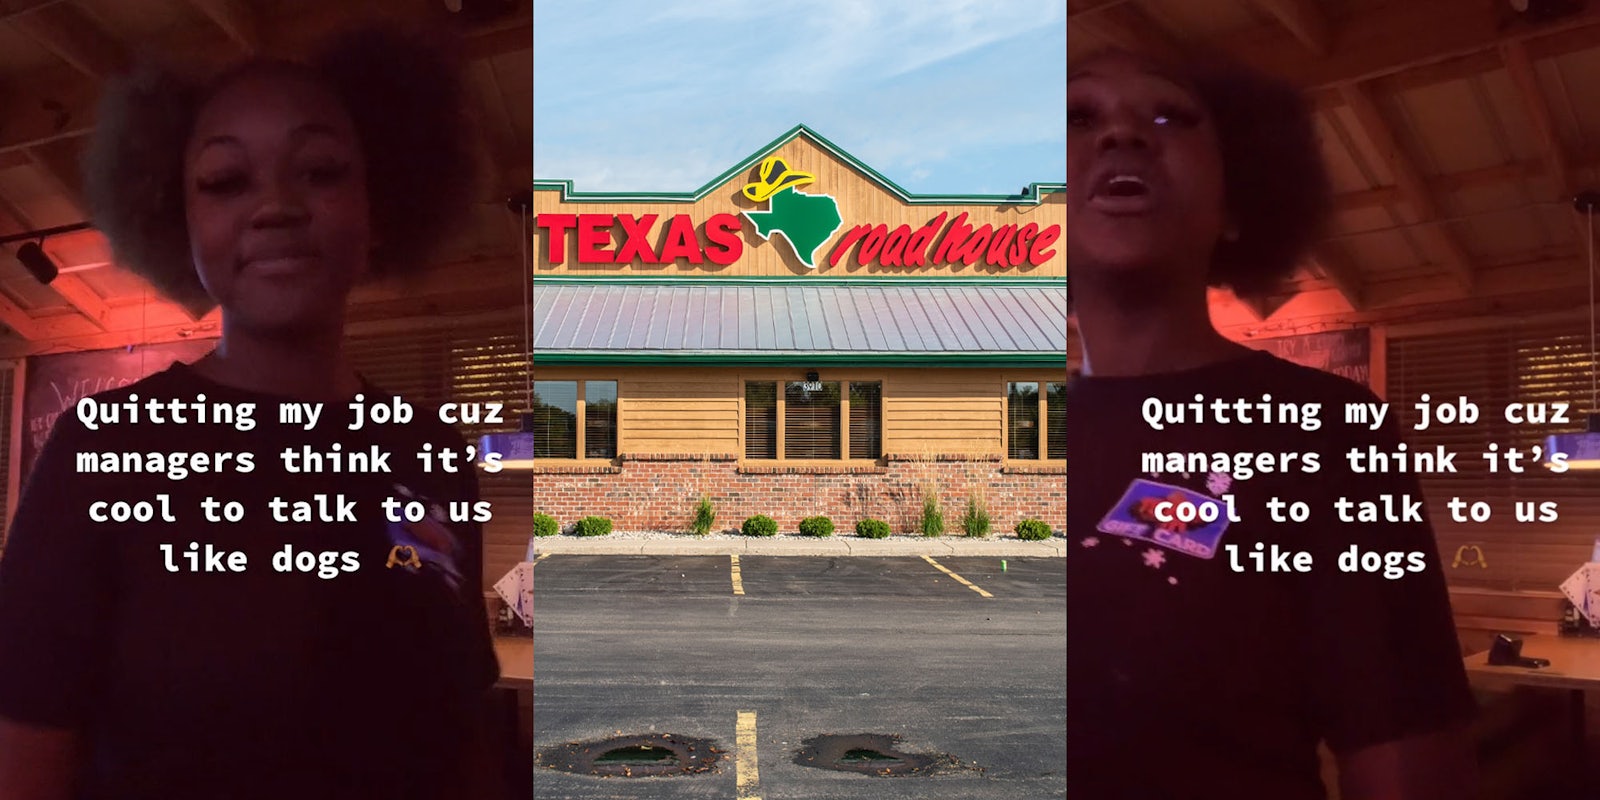 Texas Roadhouse employee with caption 'Quitting job cuz managers think it's cool to talk to us like dogs' (l) Texas Roadhouse building with sign and parking lot (c) Texas Roadhouse employee speaking with caption 'Quitting job cuz managers think it's cool to talk to us like dogs' (r)